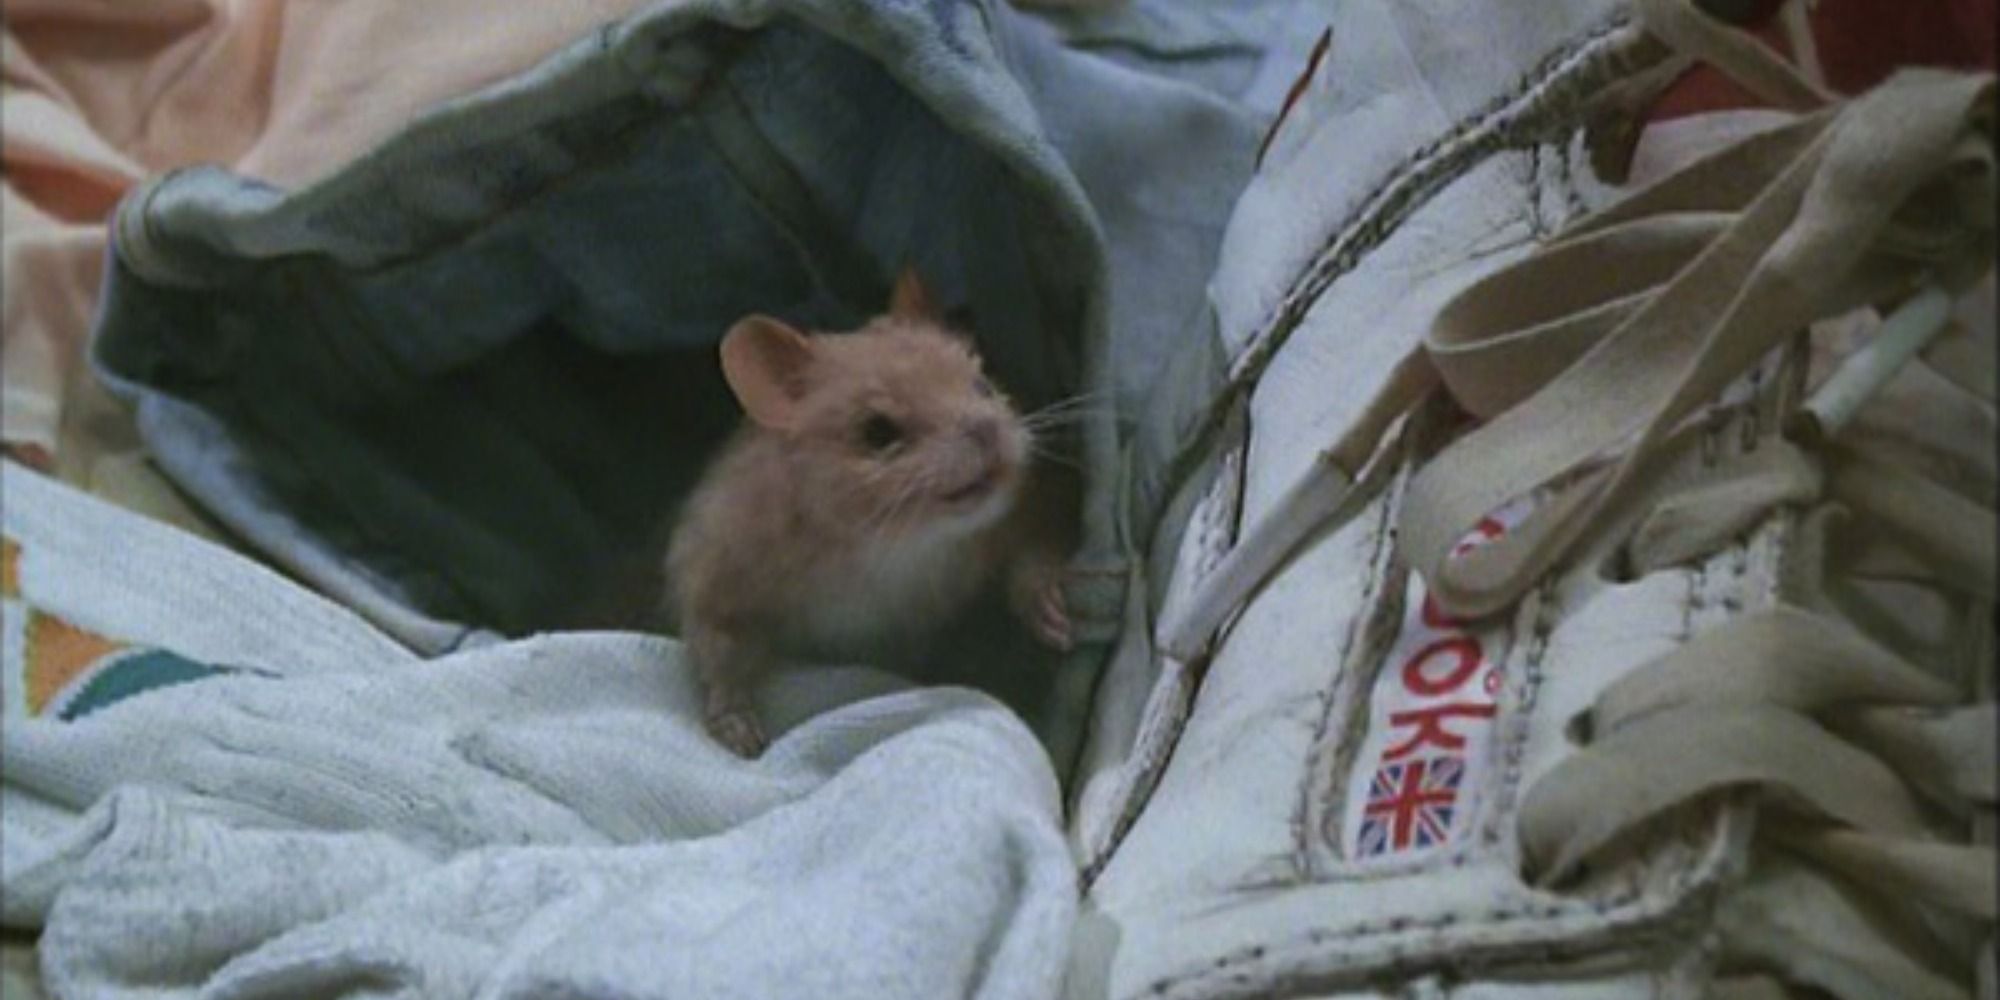 A screenshot of Luke as a mouse emerging from his clothes in The Witches (1990)